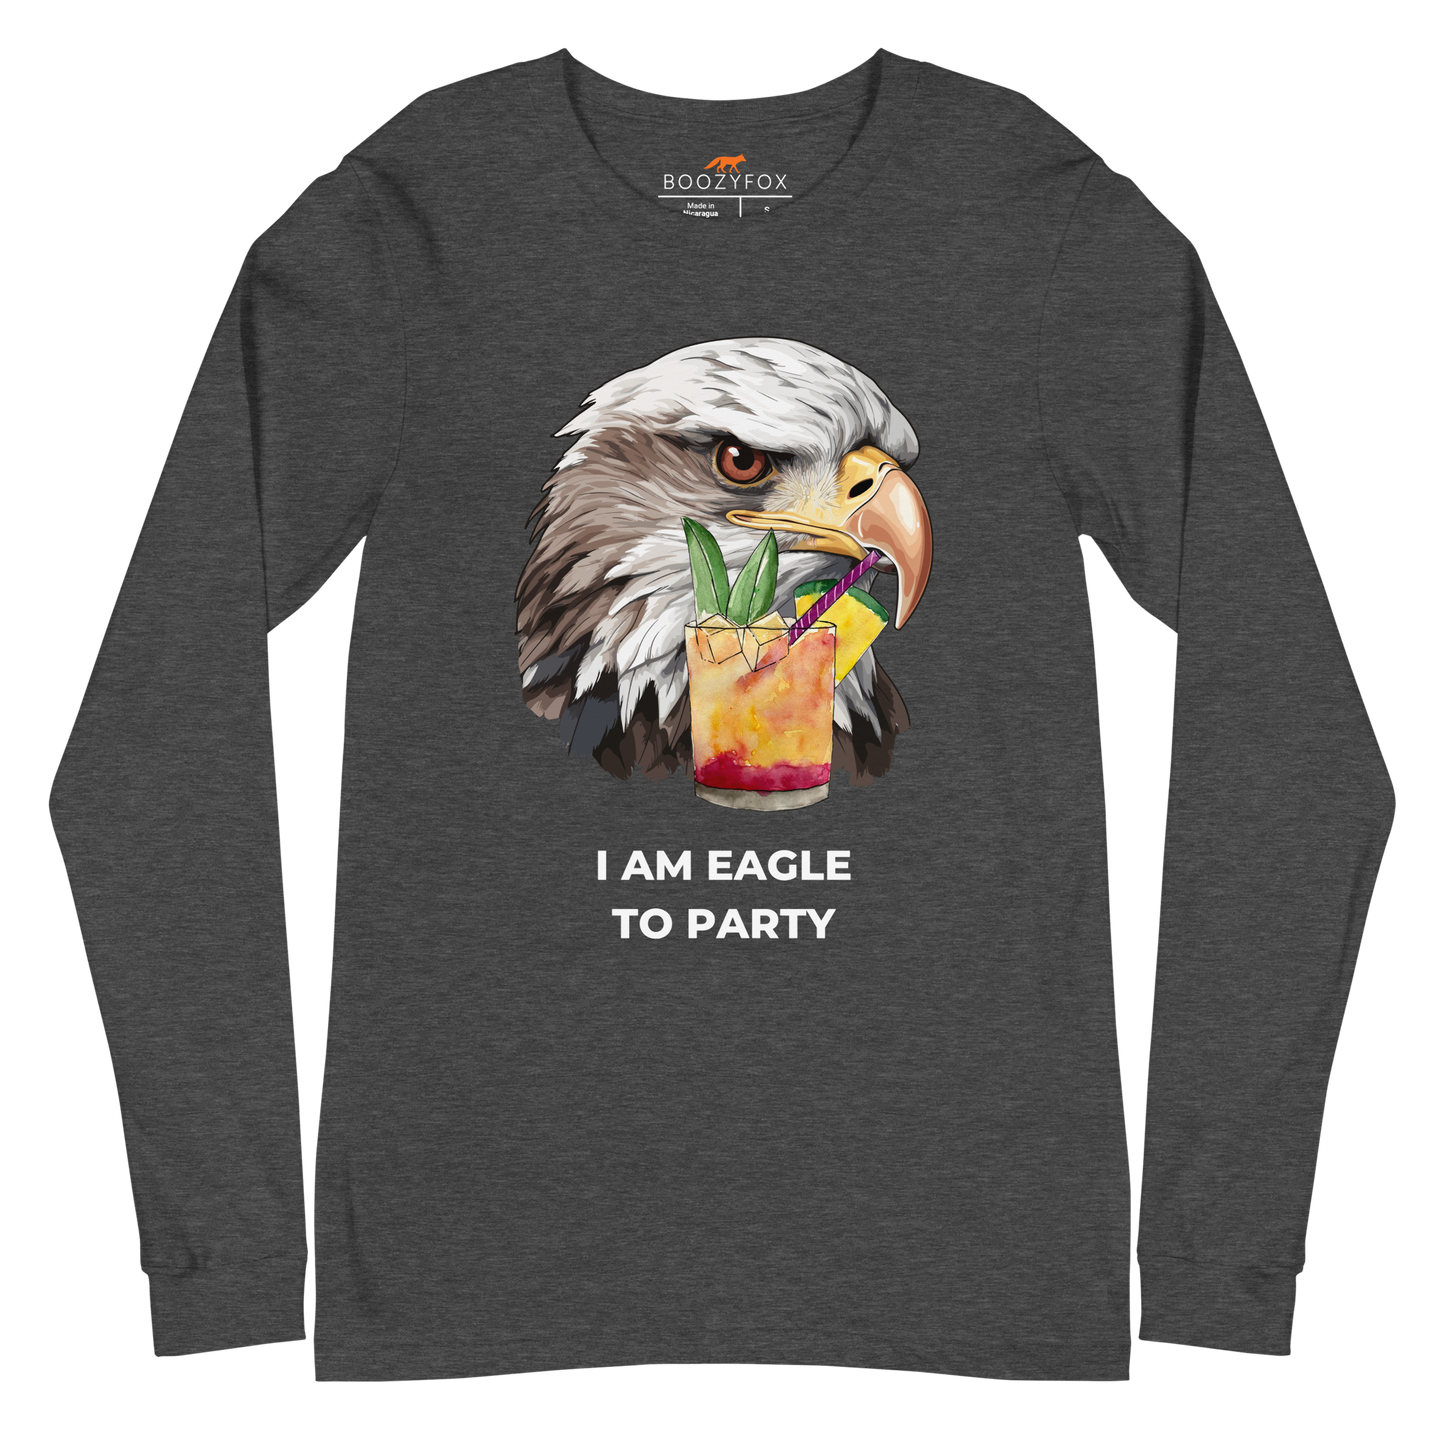 Dark Grey Heather Eagle Long Sleeve Tee featuring a captivating I Am Eagle To Party graphic on the chest - Funny Eagle Long Sleeve Graphic Tees - Boozy Fox